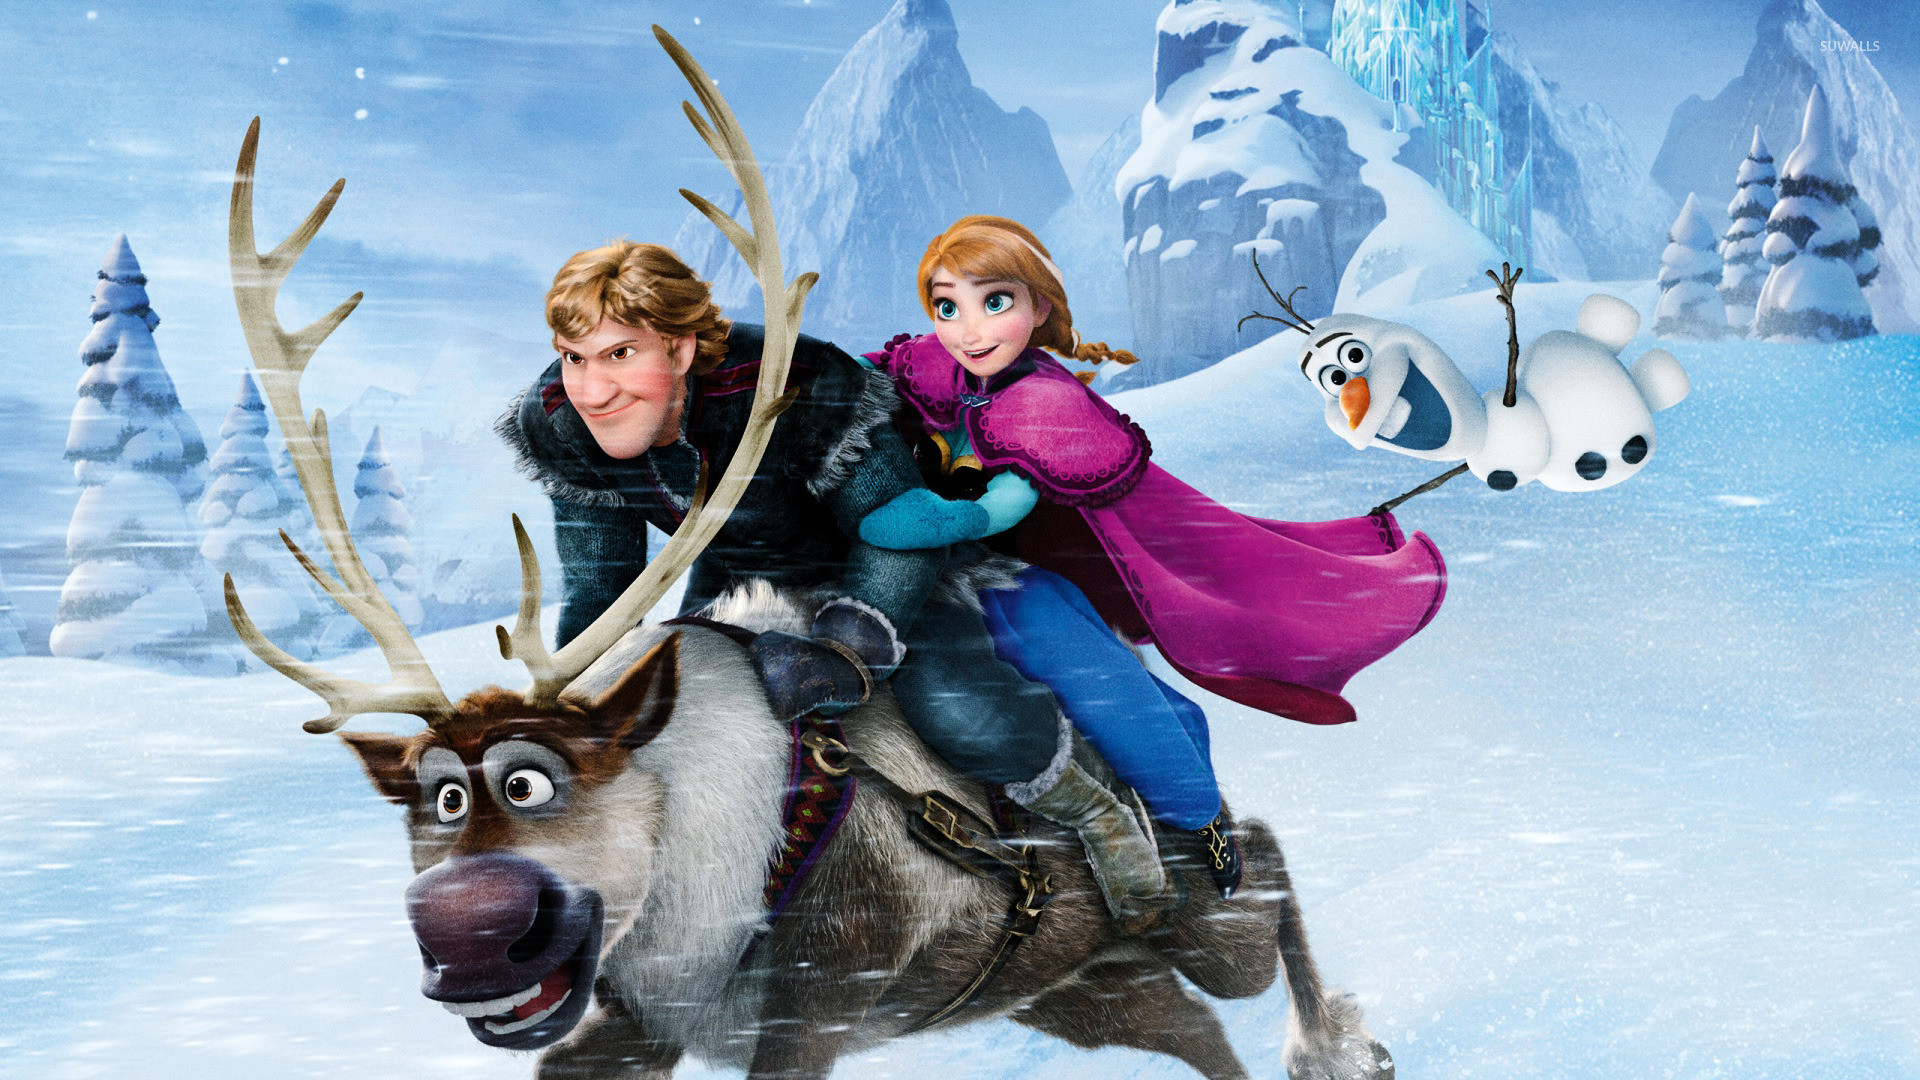 1920x1080 Frozen Cartoon Wallpapers are given here so that you can get Frozen Cartoon  Images in your from this page.